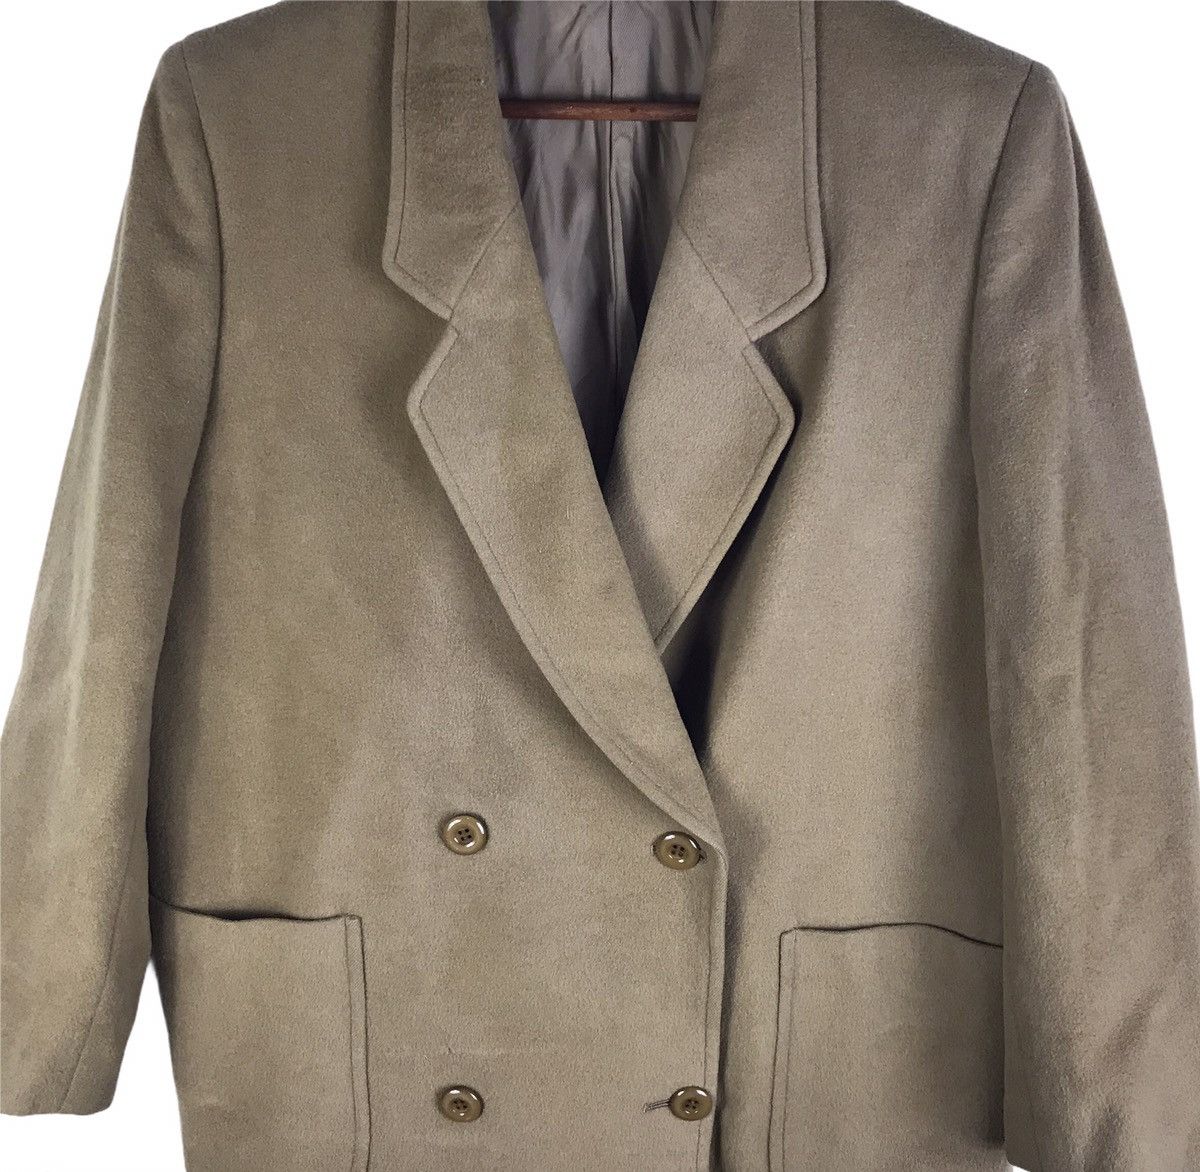 Burberry Double Breasted Wool Peacoat Jacket - 3